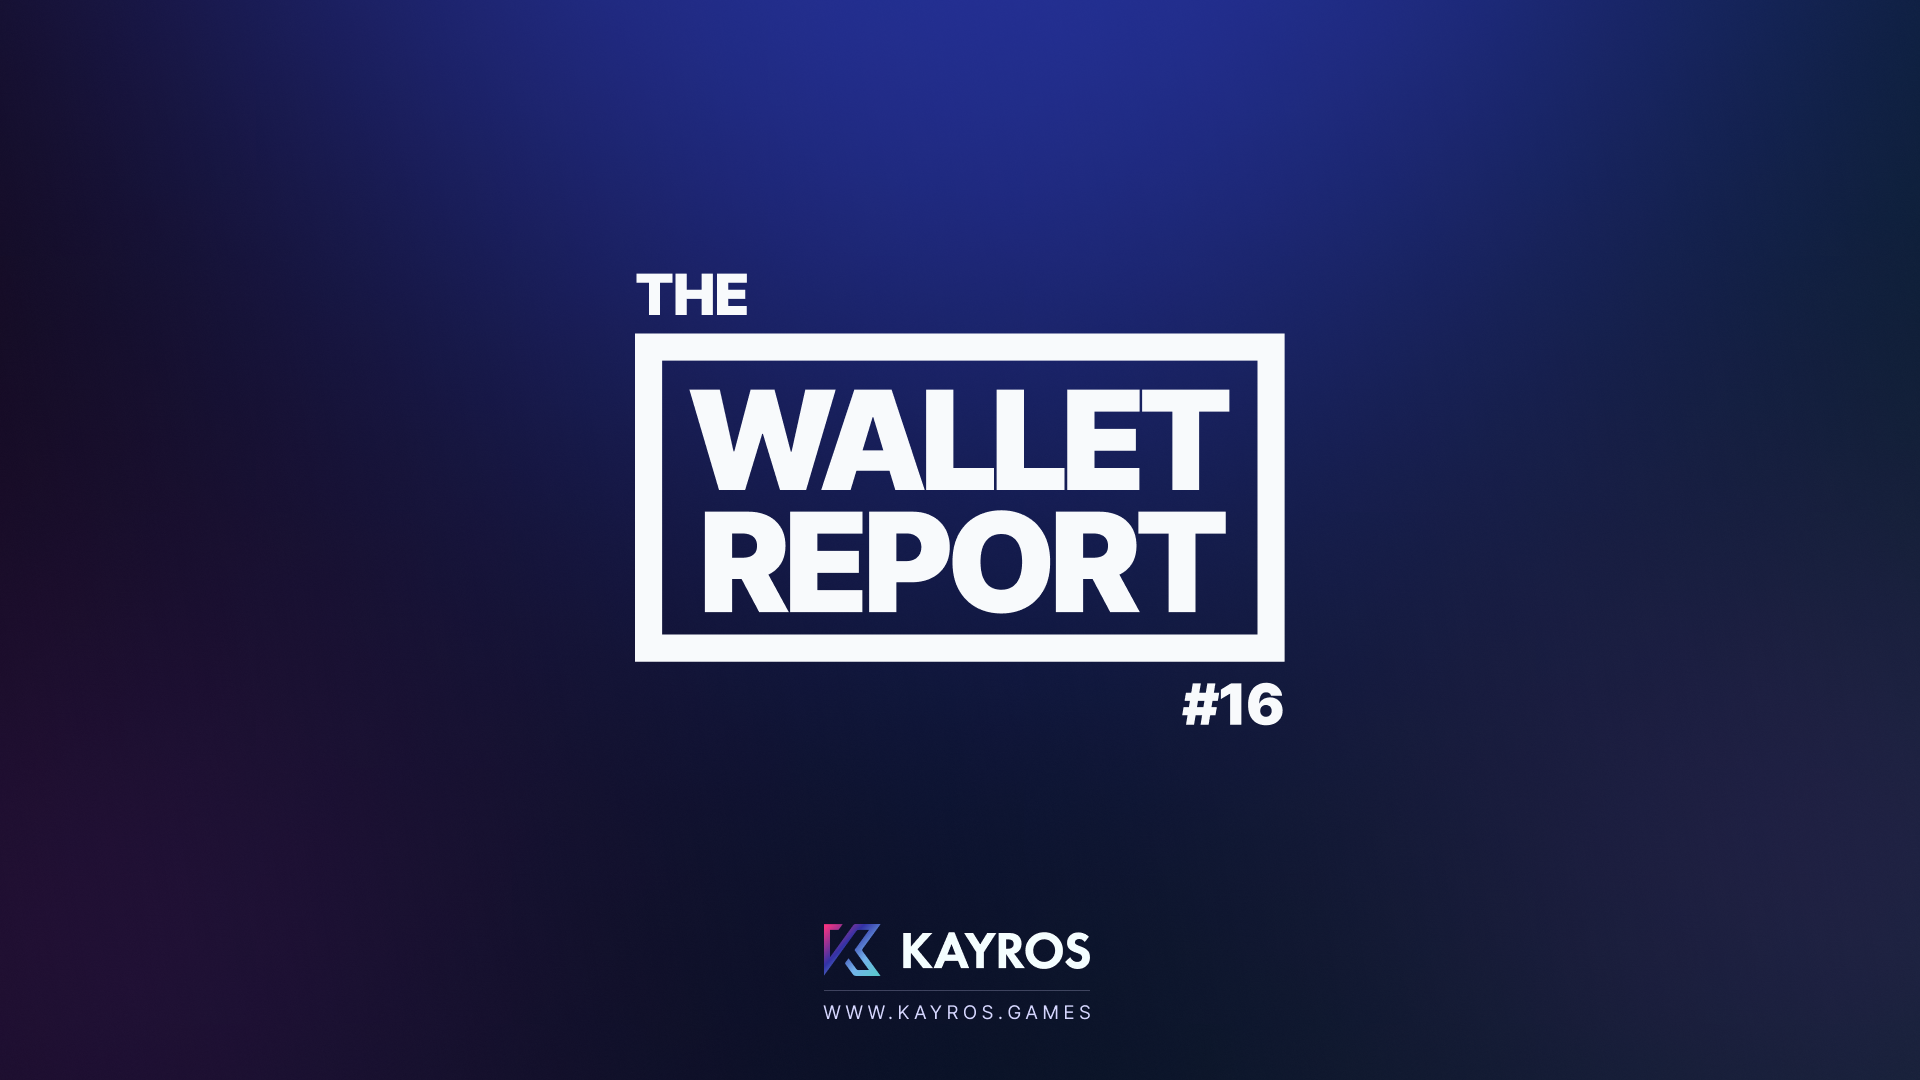 The Wallet Report #16